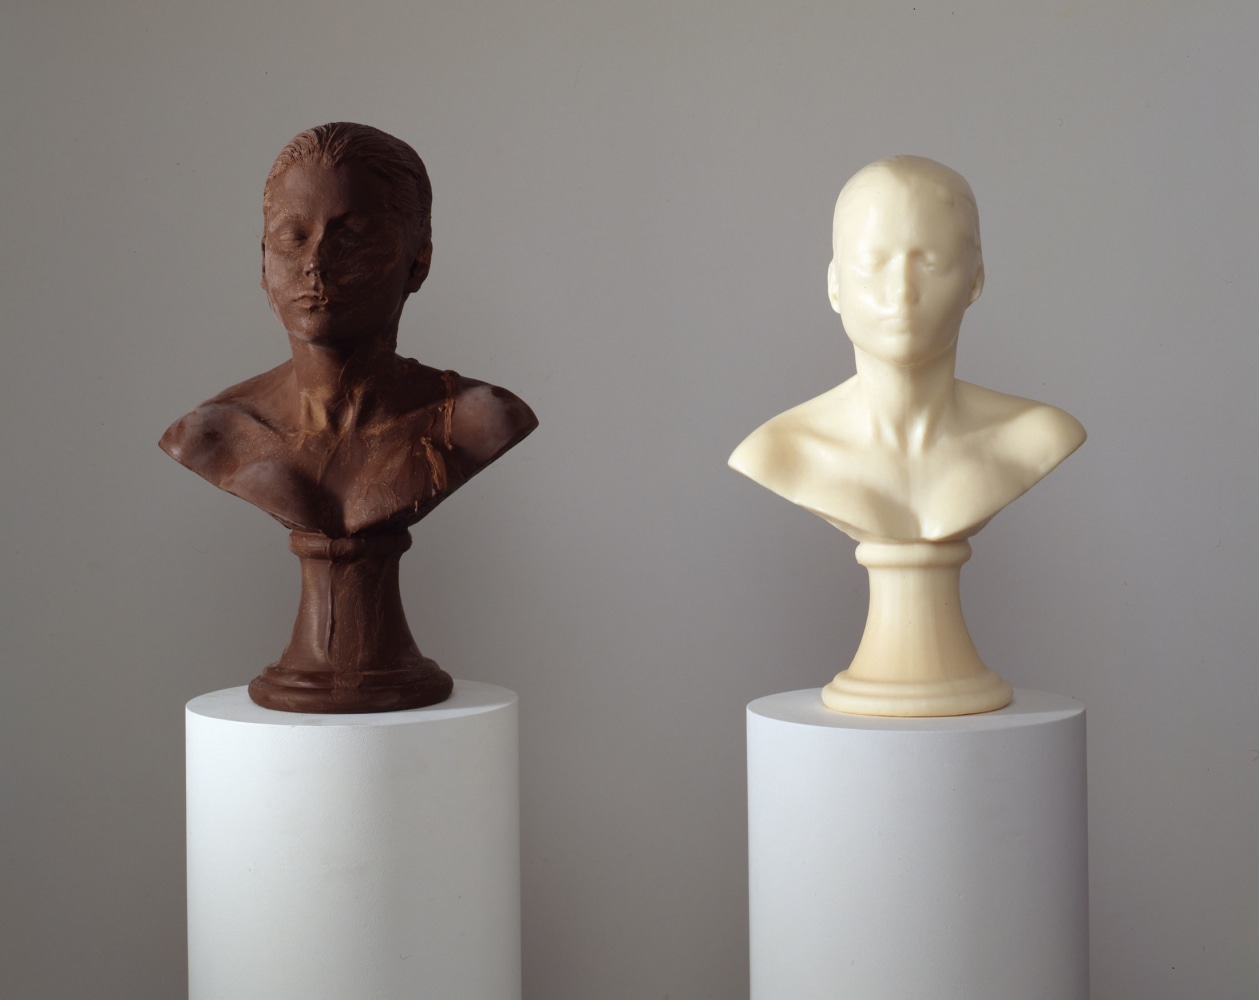 Janine Antoni
Lick and Lather, 1993
Two busts: one chocolate and one soap, two pedestals
Edition of 7 and 2 artist&amp;#39;s proofs
Each: 24 x 16 x 13 inches (60.96 x 40.64 x 33.02 cm)